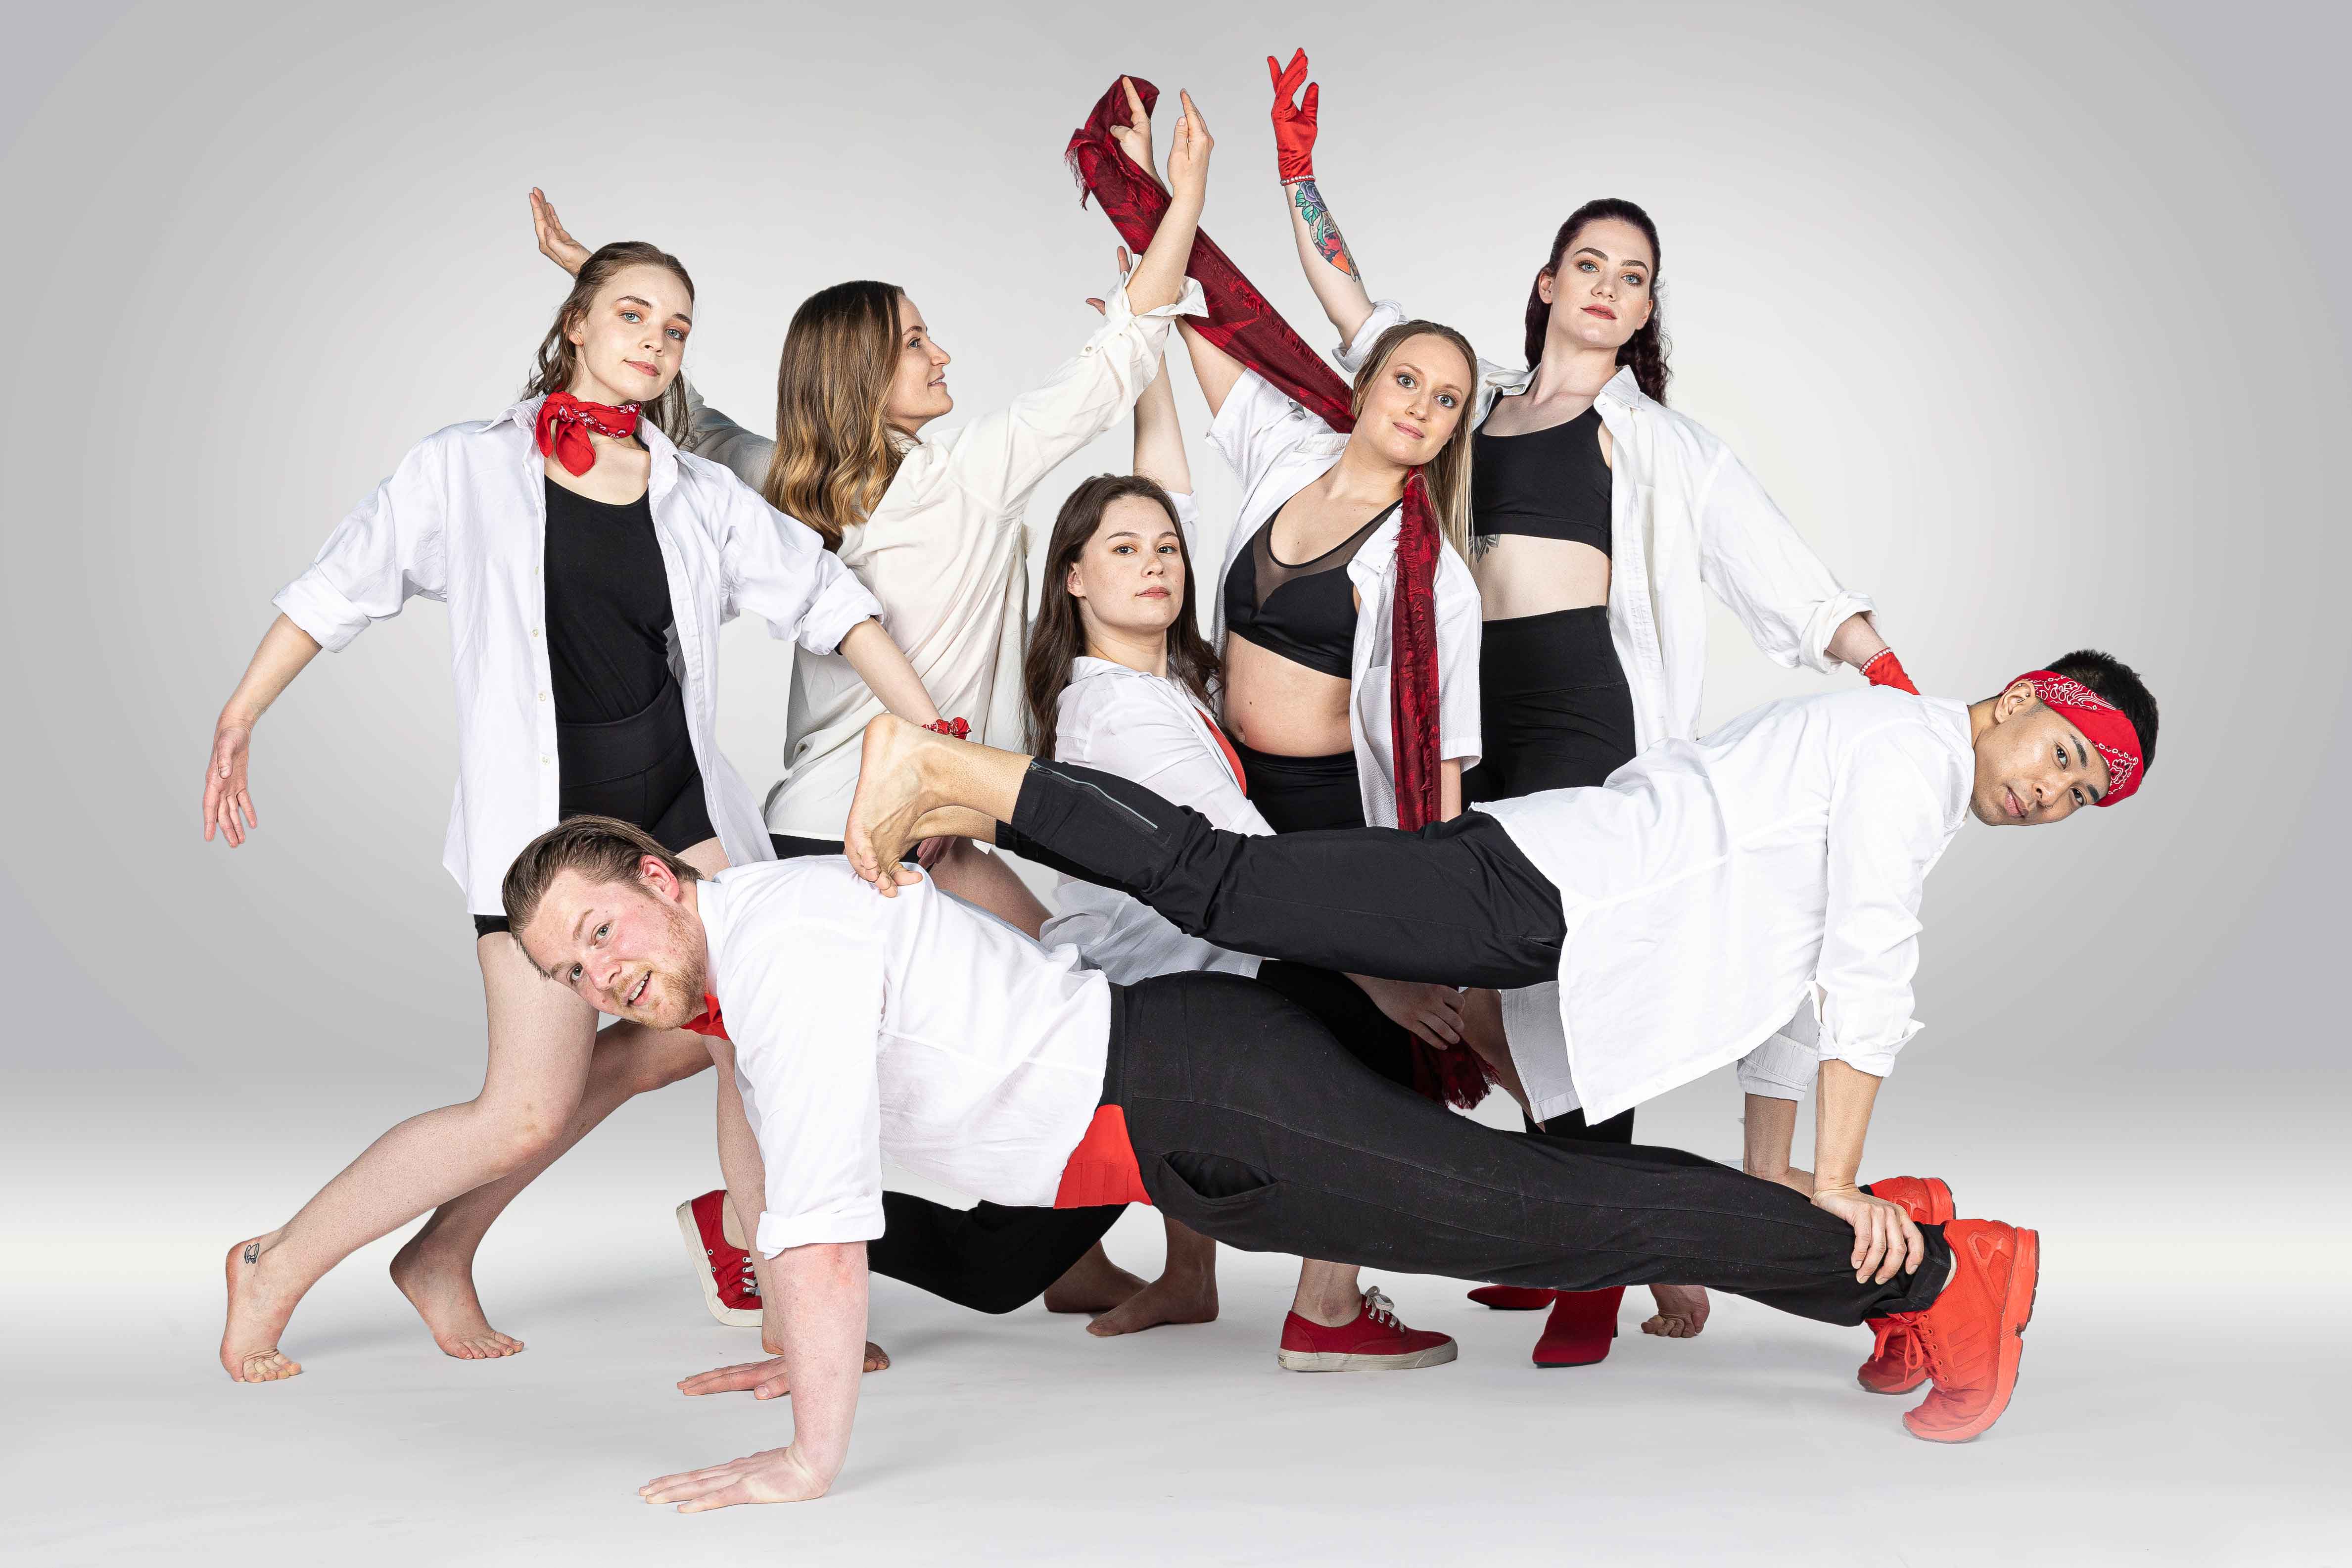 Contemporary dance group poses in studio - Stock Photo #28075127 |  PantherMedia Stock Agency